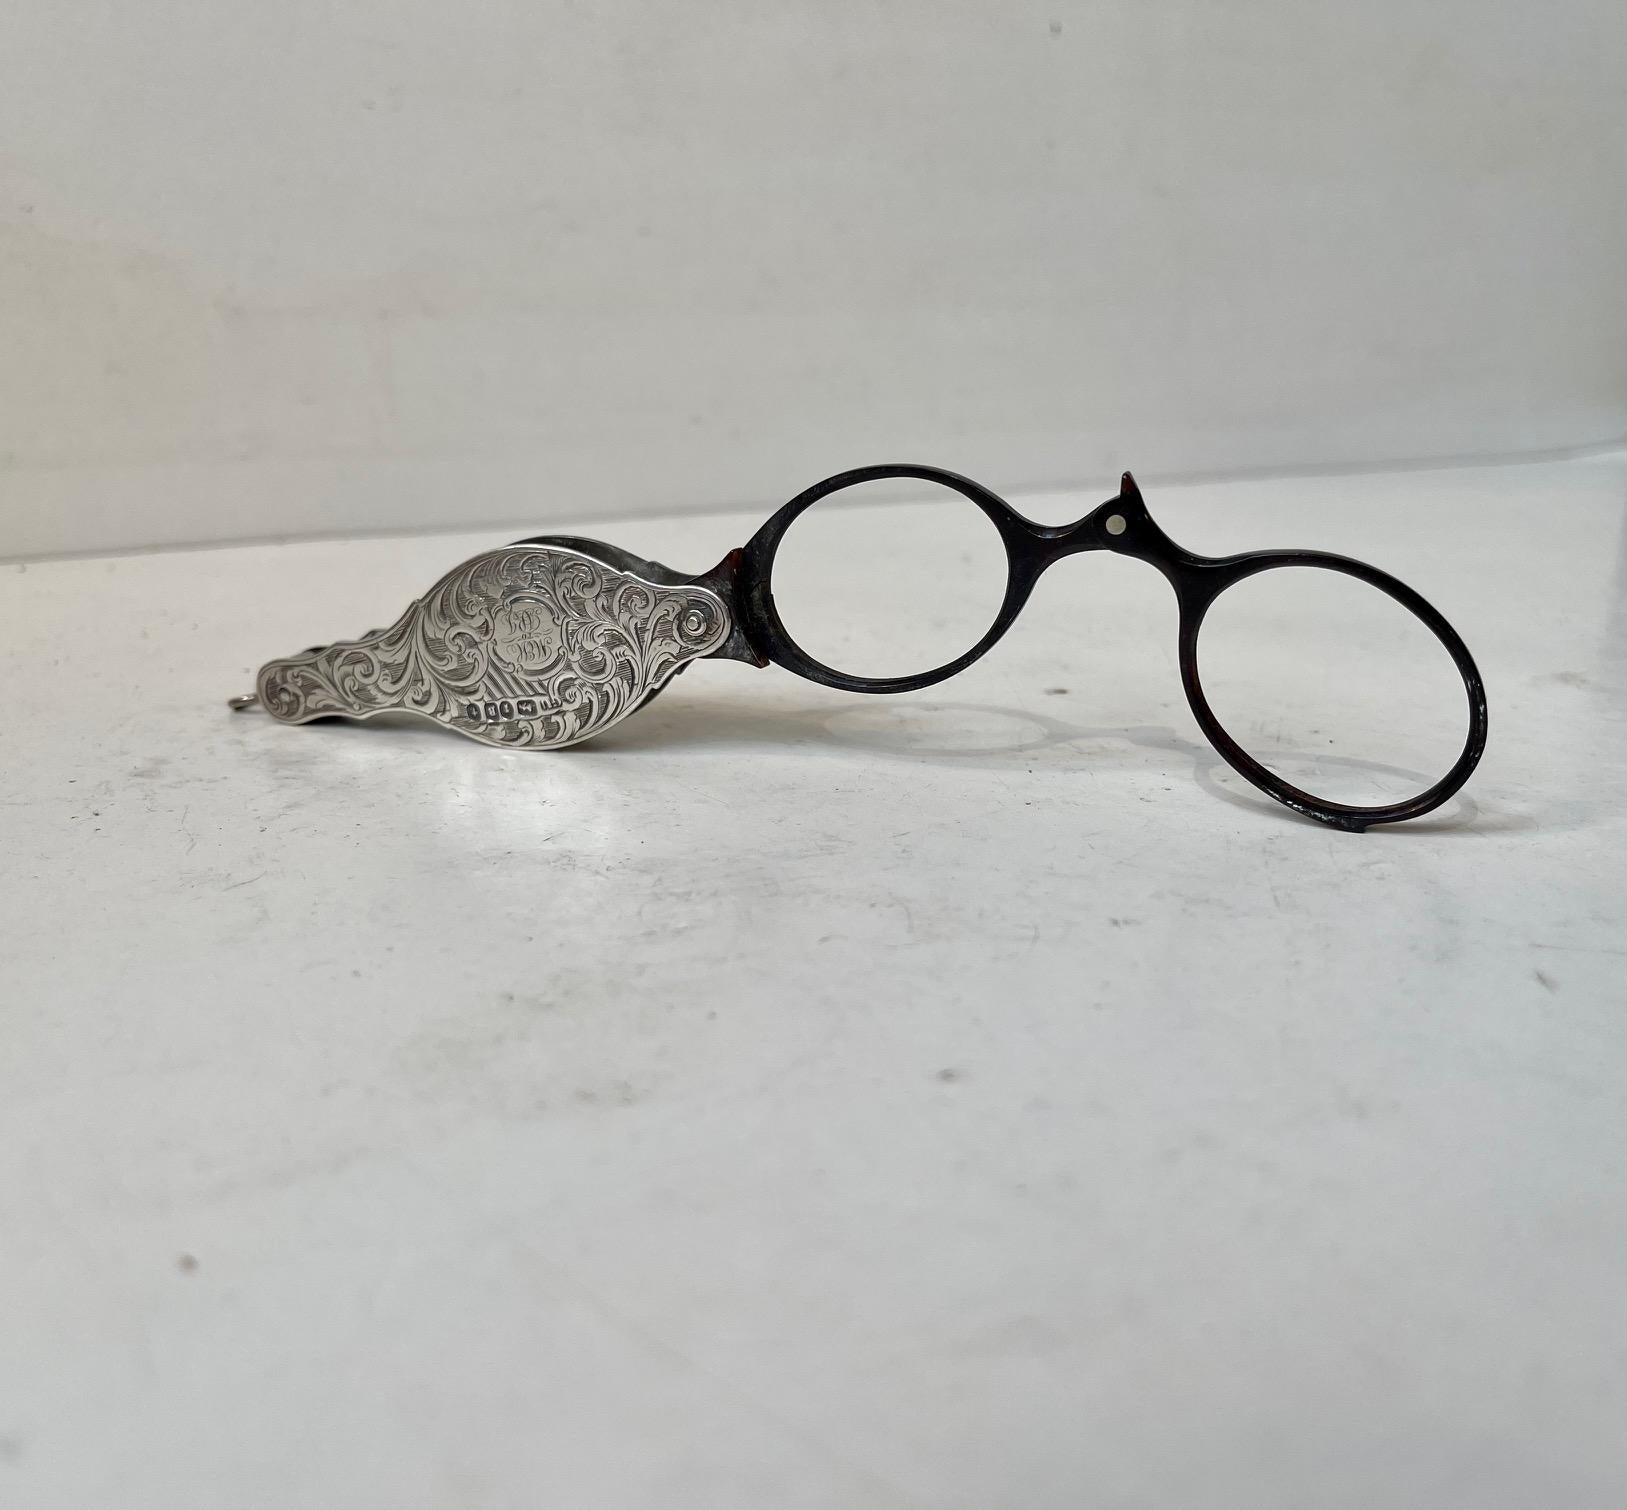 Antique Lorgnettes Pendant Spectacles in Silver by Georg Unite & Sons Birmingham In Fair Condition For Sale In Esbjerg, DK